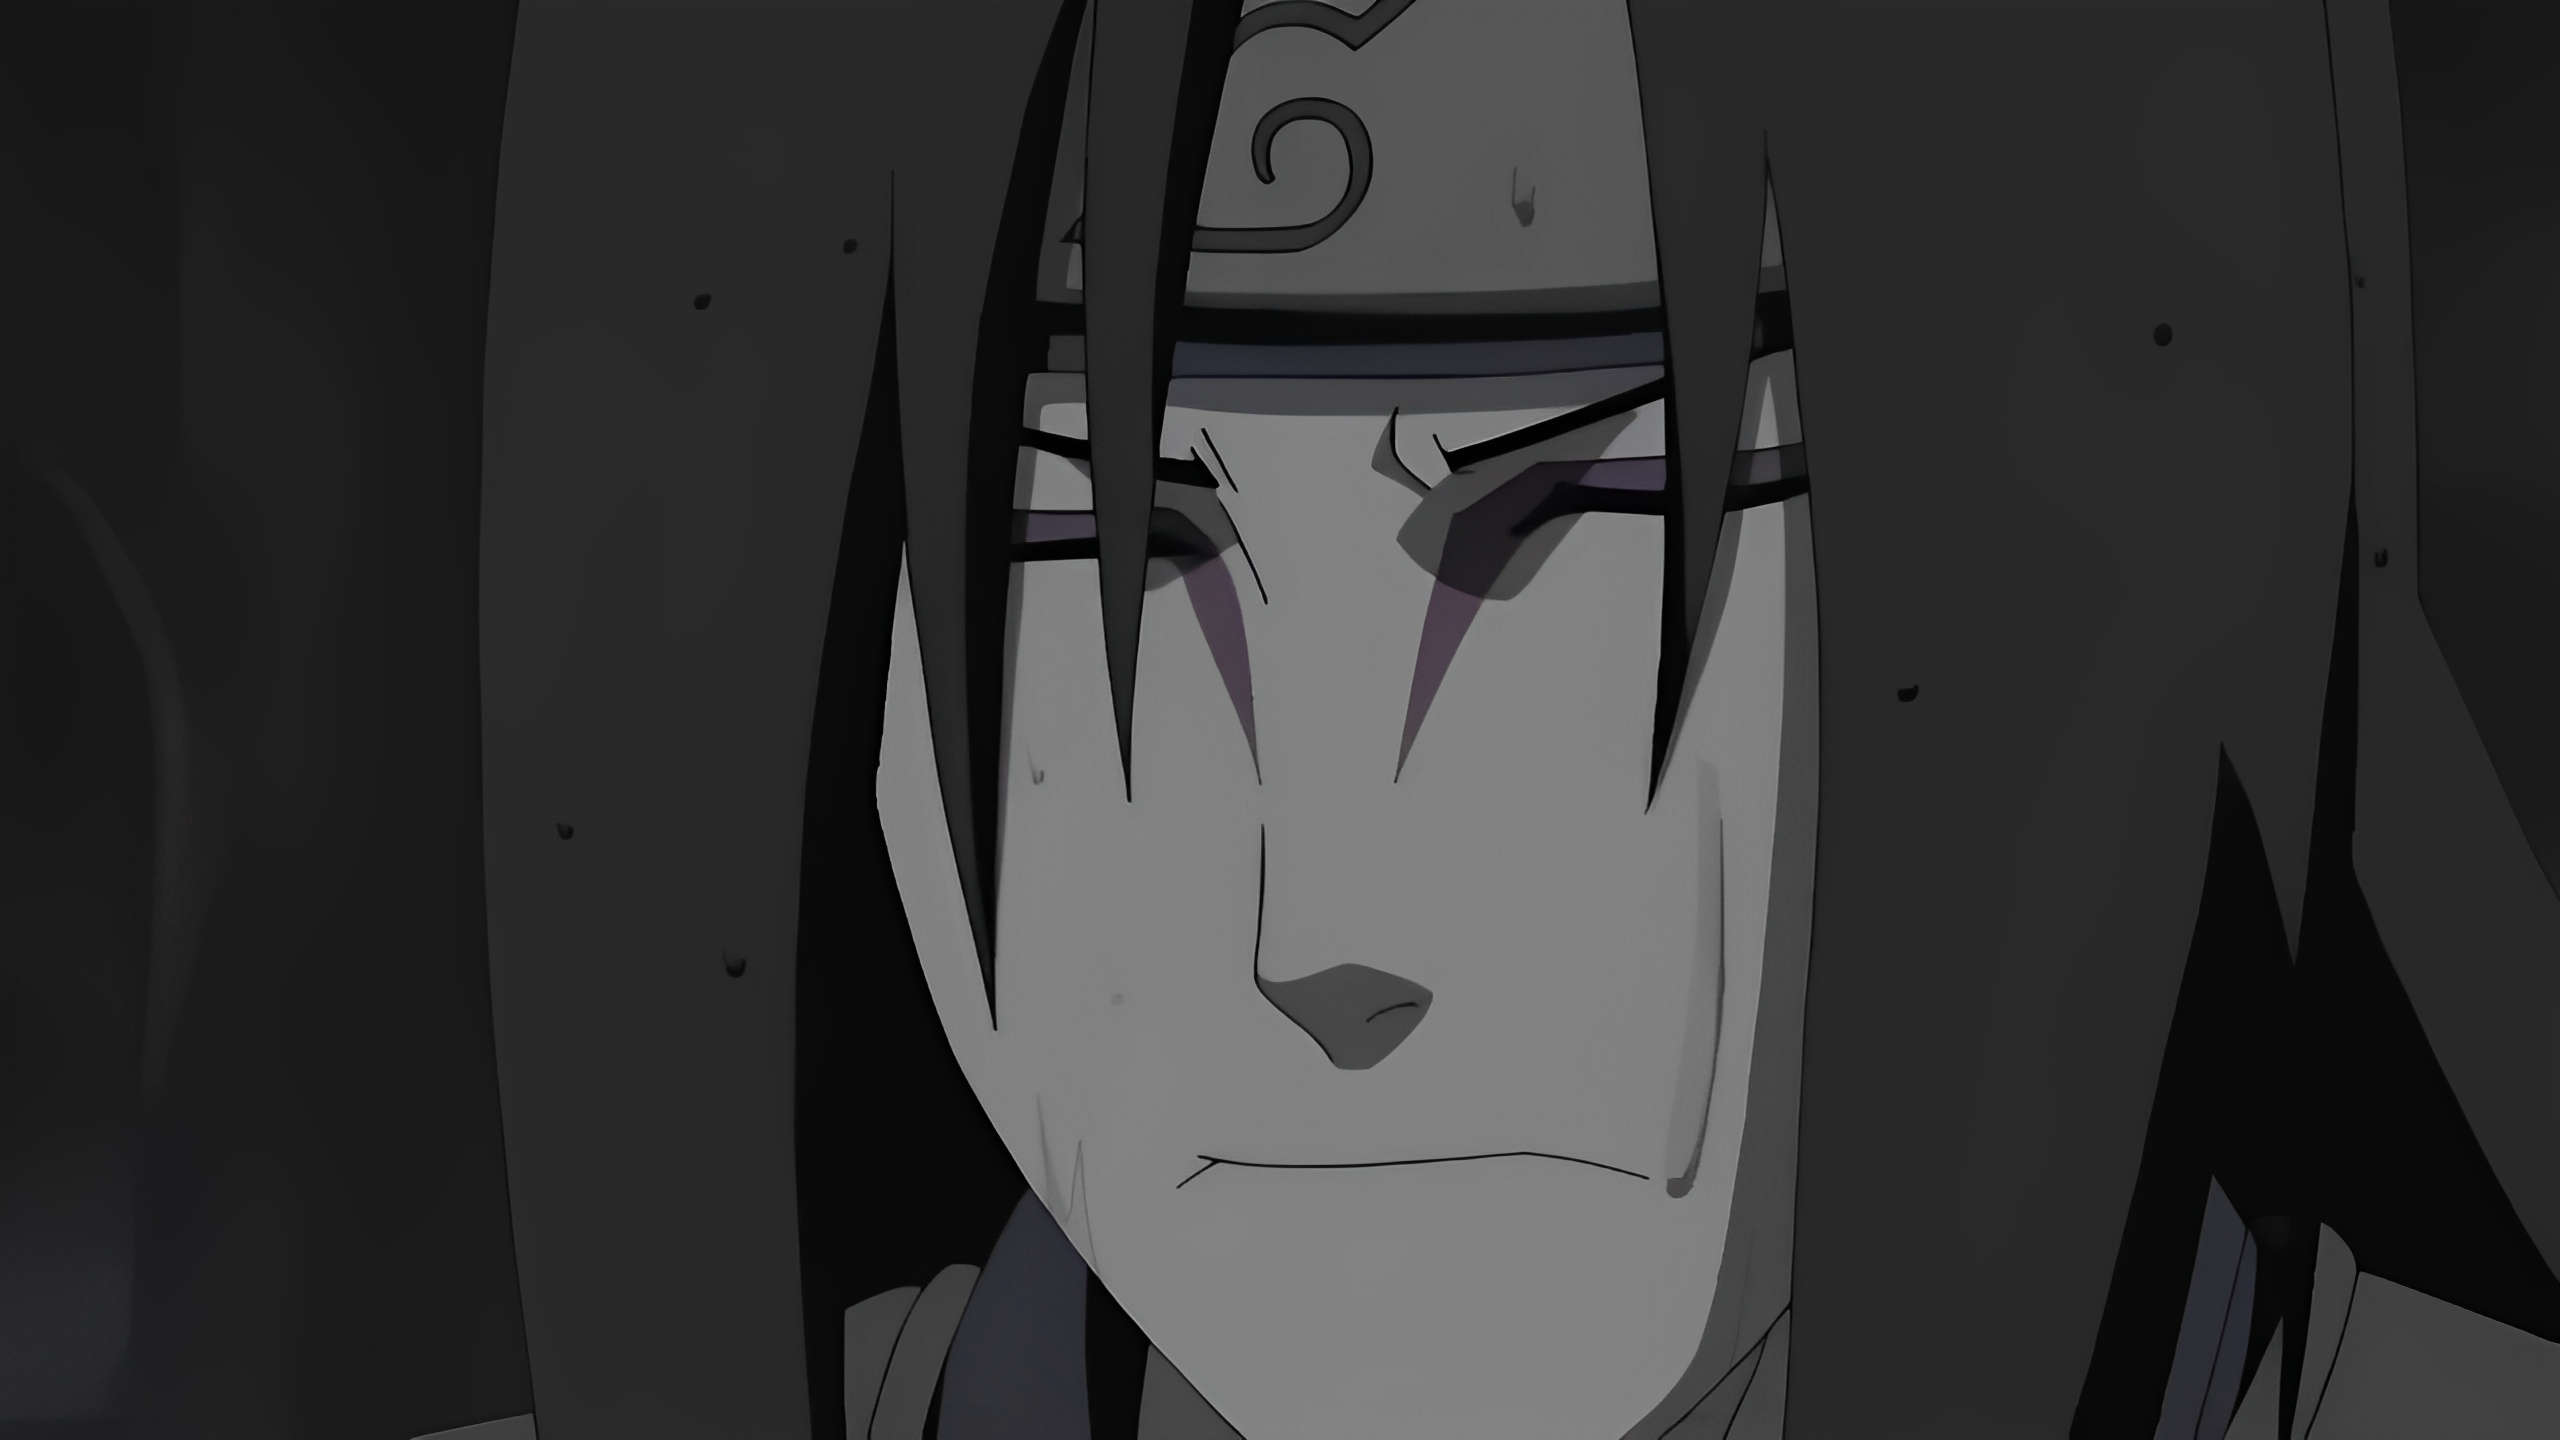 My disdain for third hokage and stuff he could have prevented burns till  today. : r/Naruto